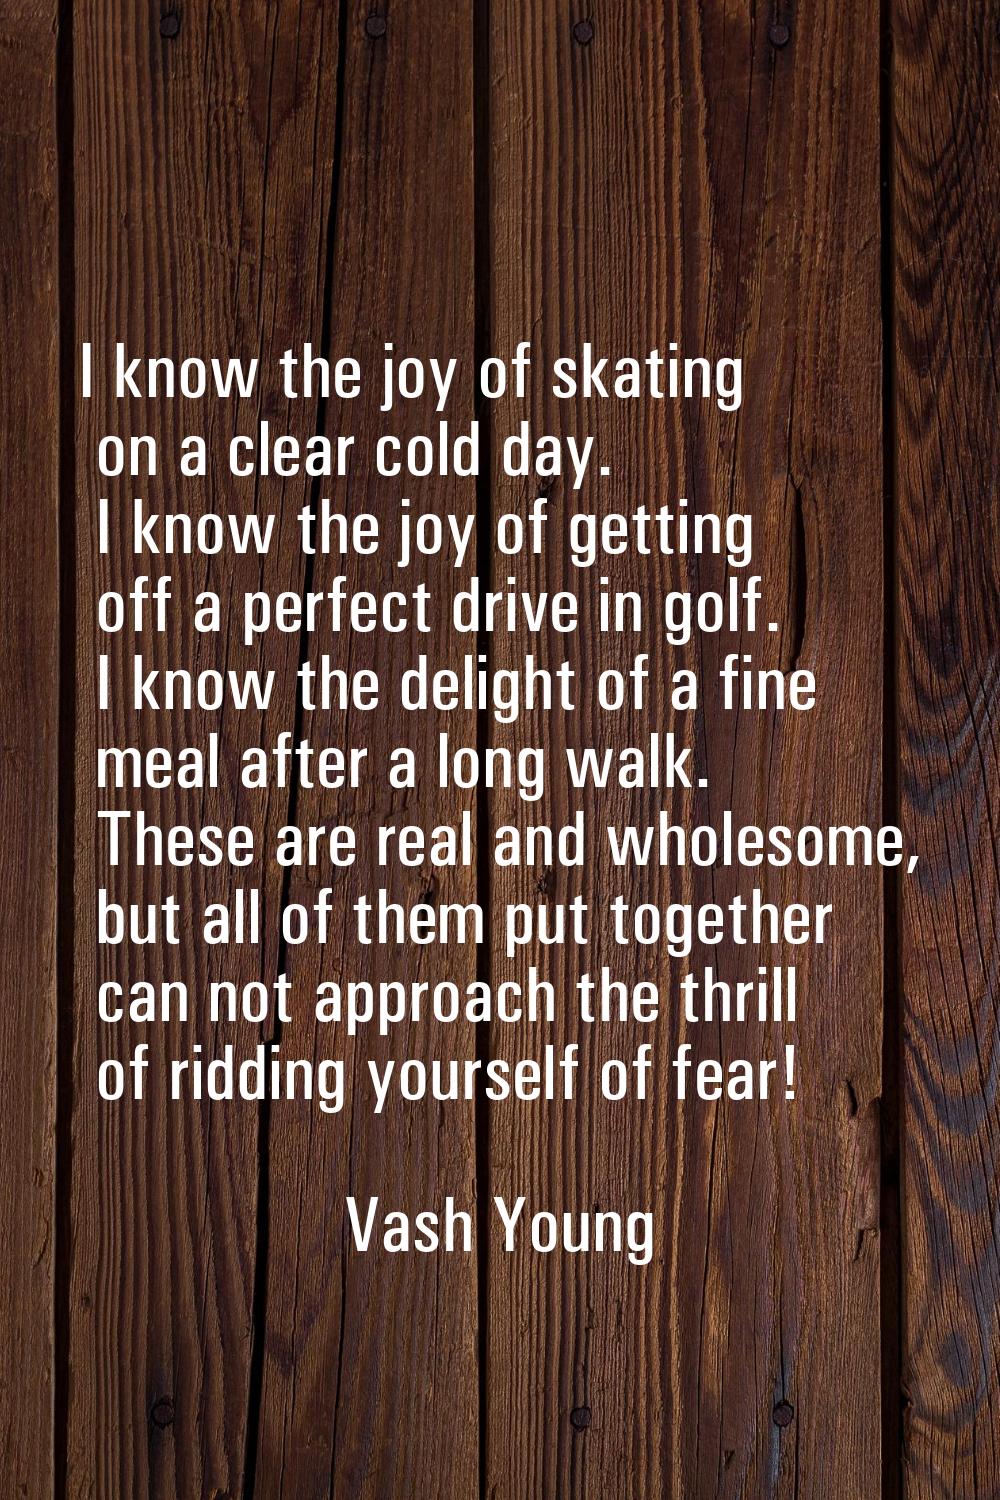 I know the joy of skating on a clear cold day. I know the joy of getting off a perfect drive in gol